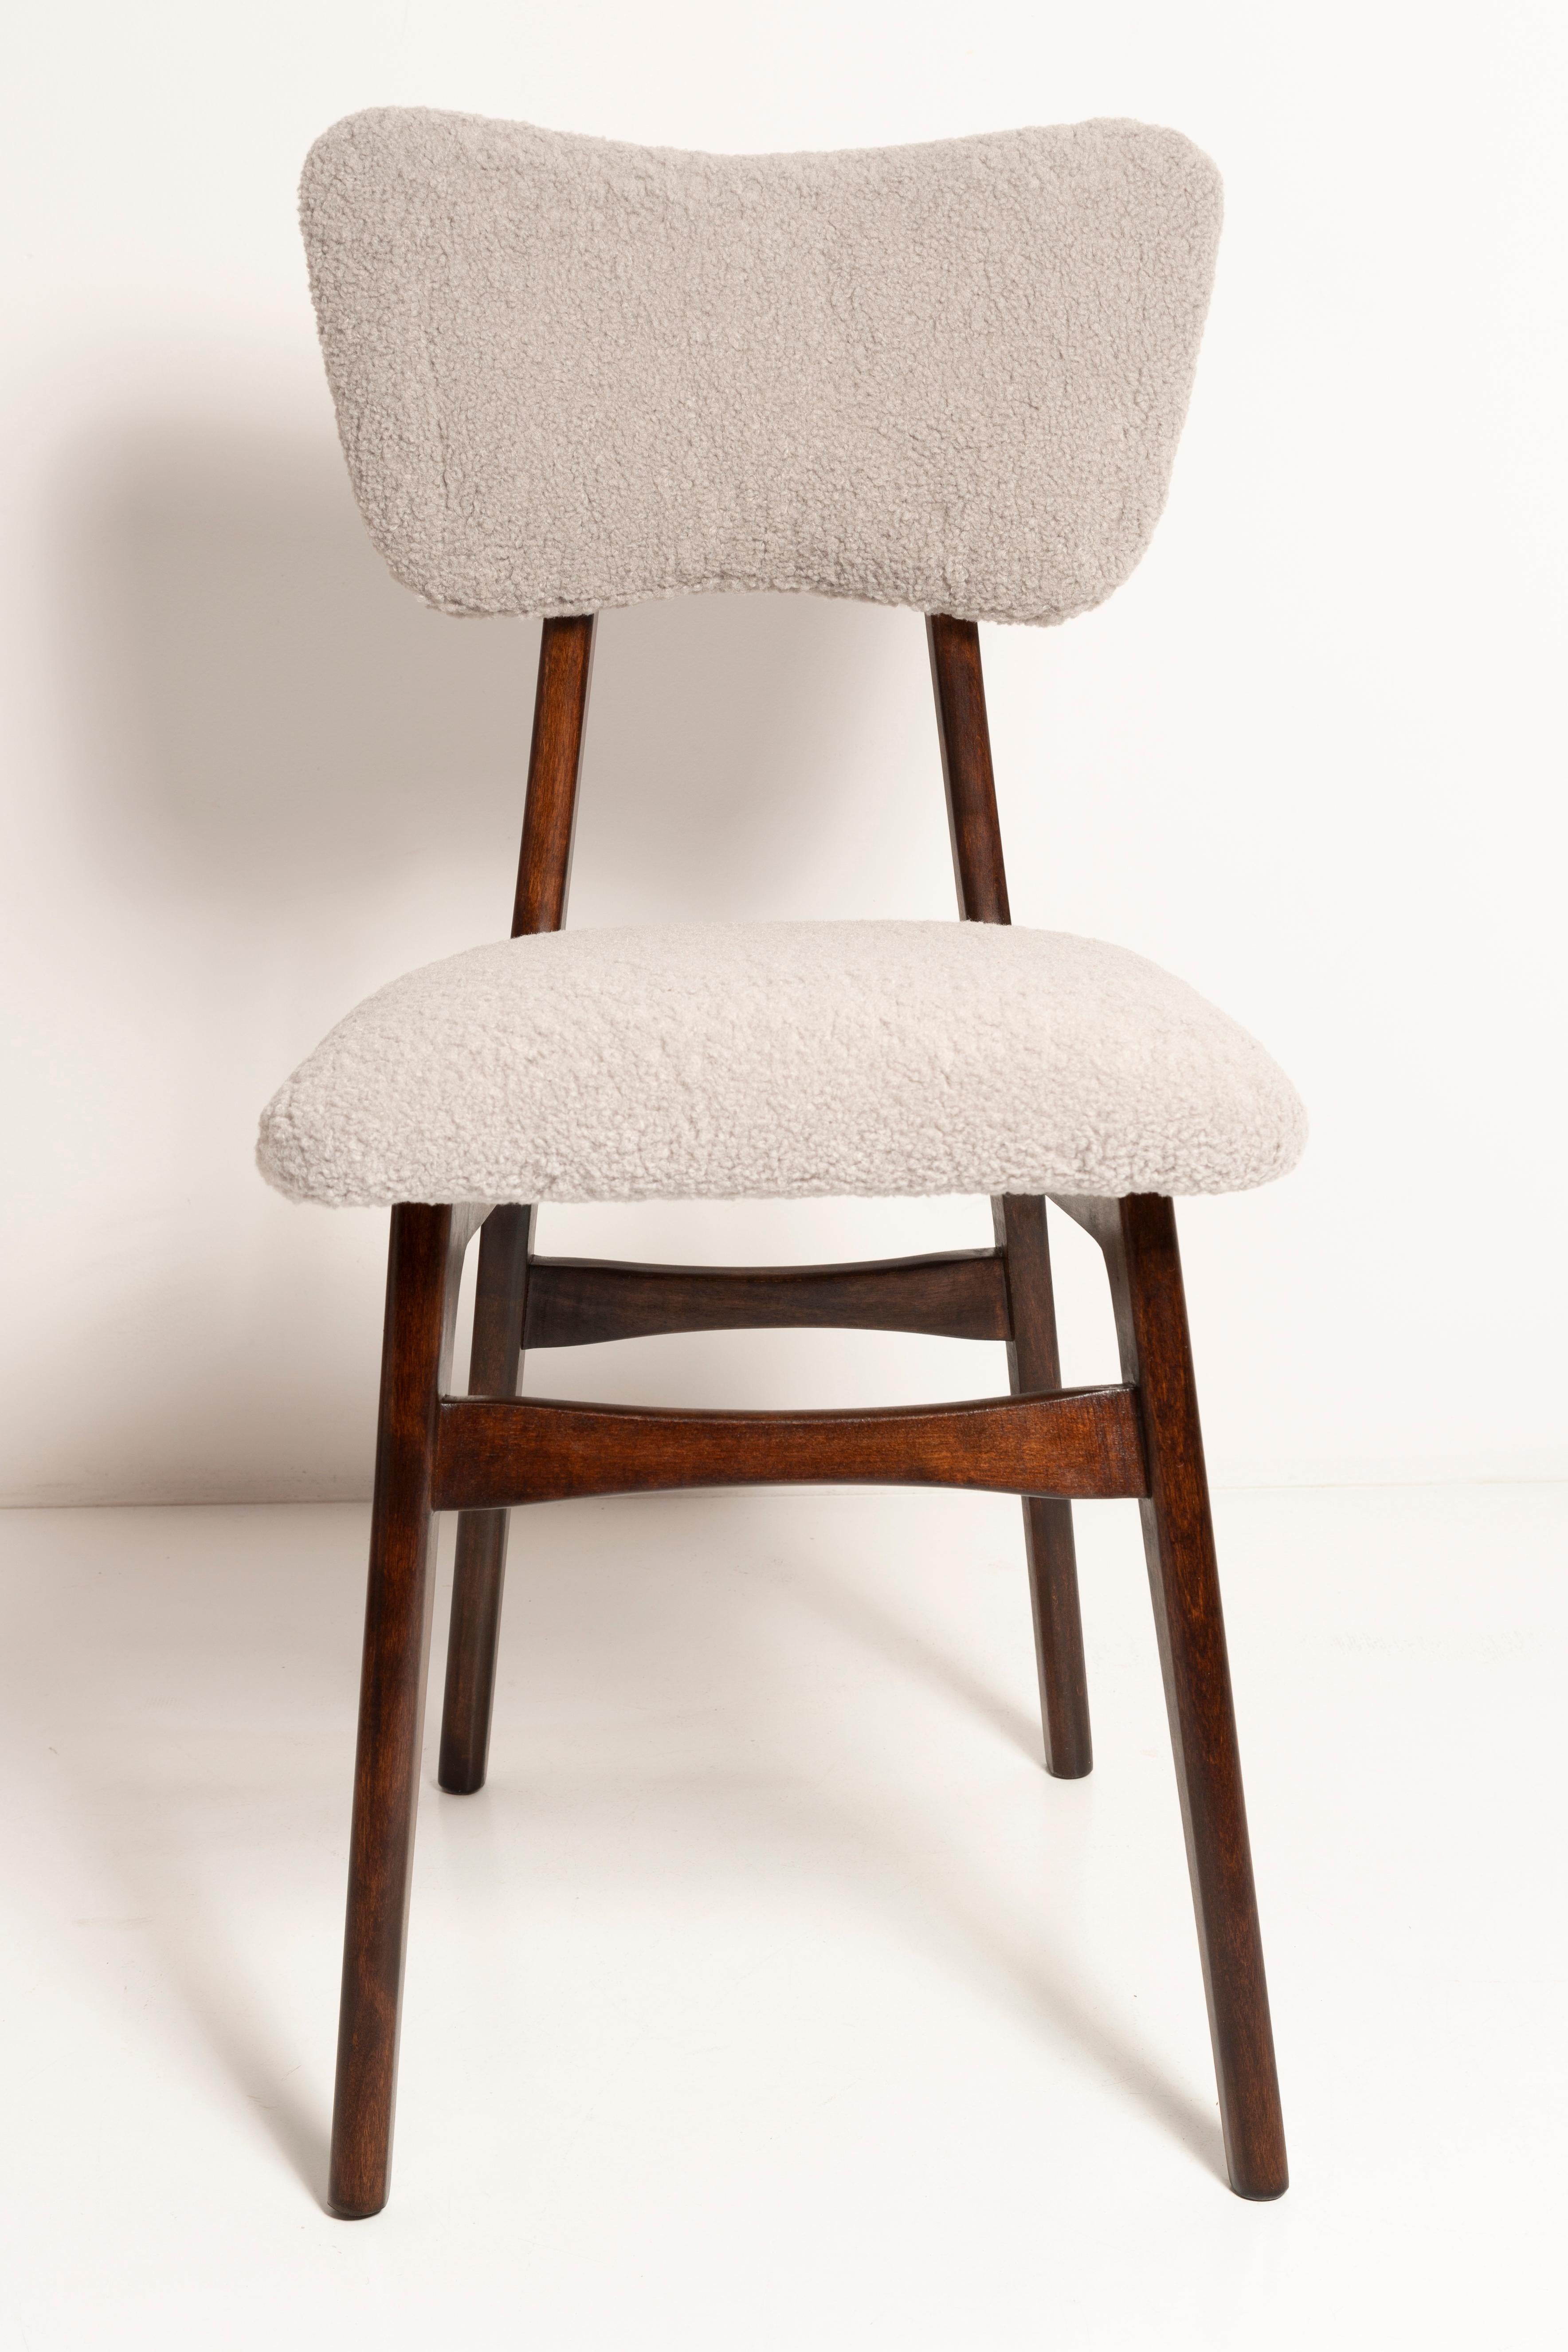 Mid Century Butterfly Chair, Light Gray Boucle, Dark Walnut Wood, Europe, 1960s For Sale 4